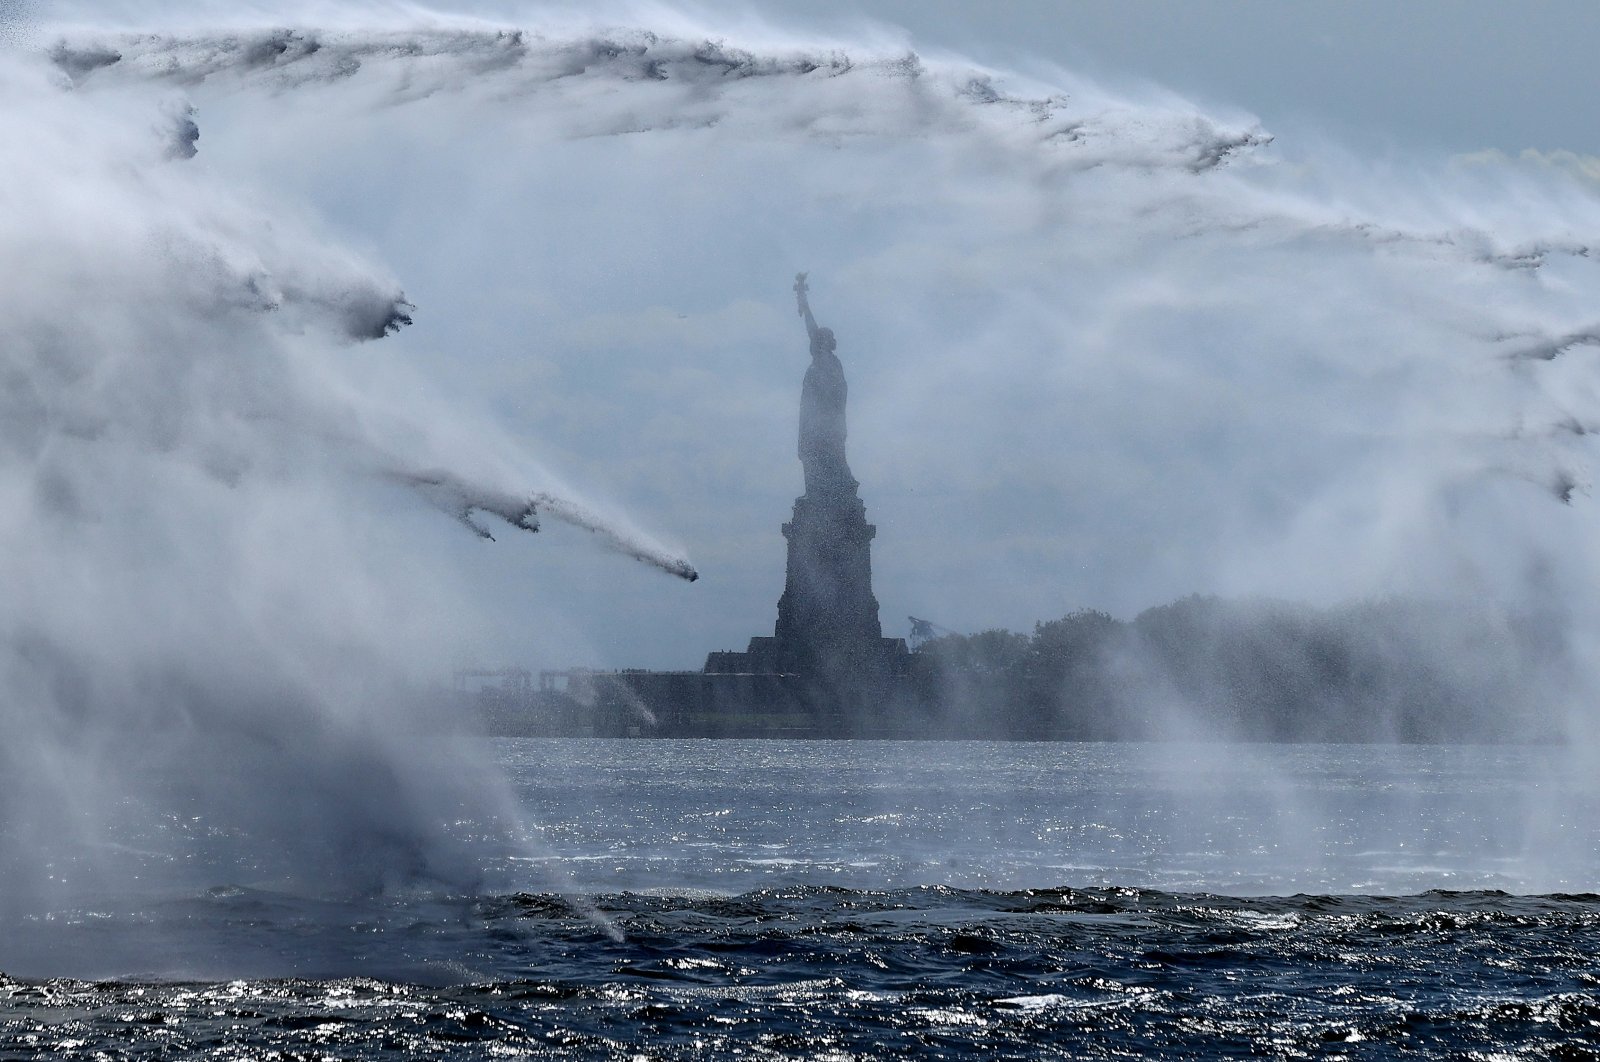 The Statue of Liberty is seen through the spray created during the 20th-anniversary commemoration of 9/11 along Lower Manhattan, New York City., U.S., Sept. 10, 2021. (Photo by Getty Images)